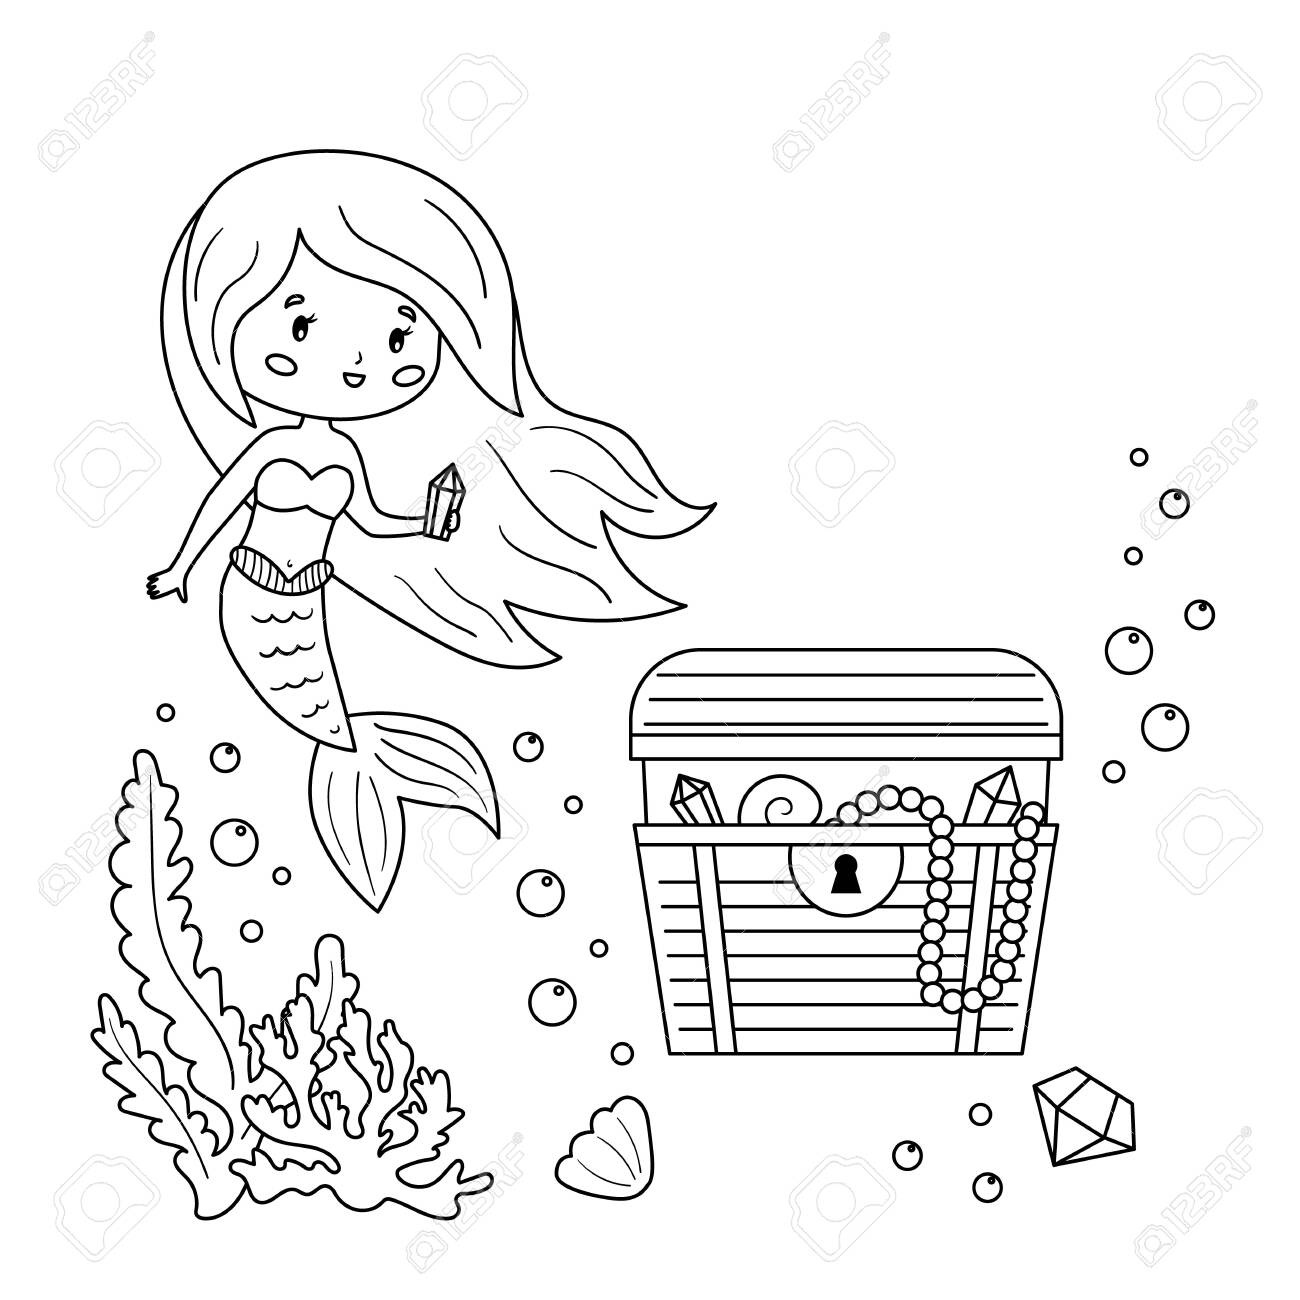 Coloring page for children cute cartoon mermaid with underwater treasure chest vector kawaii character royalty free svg cliparts vectors and stock illustration image